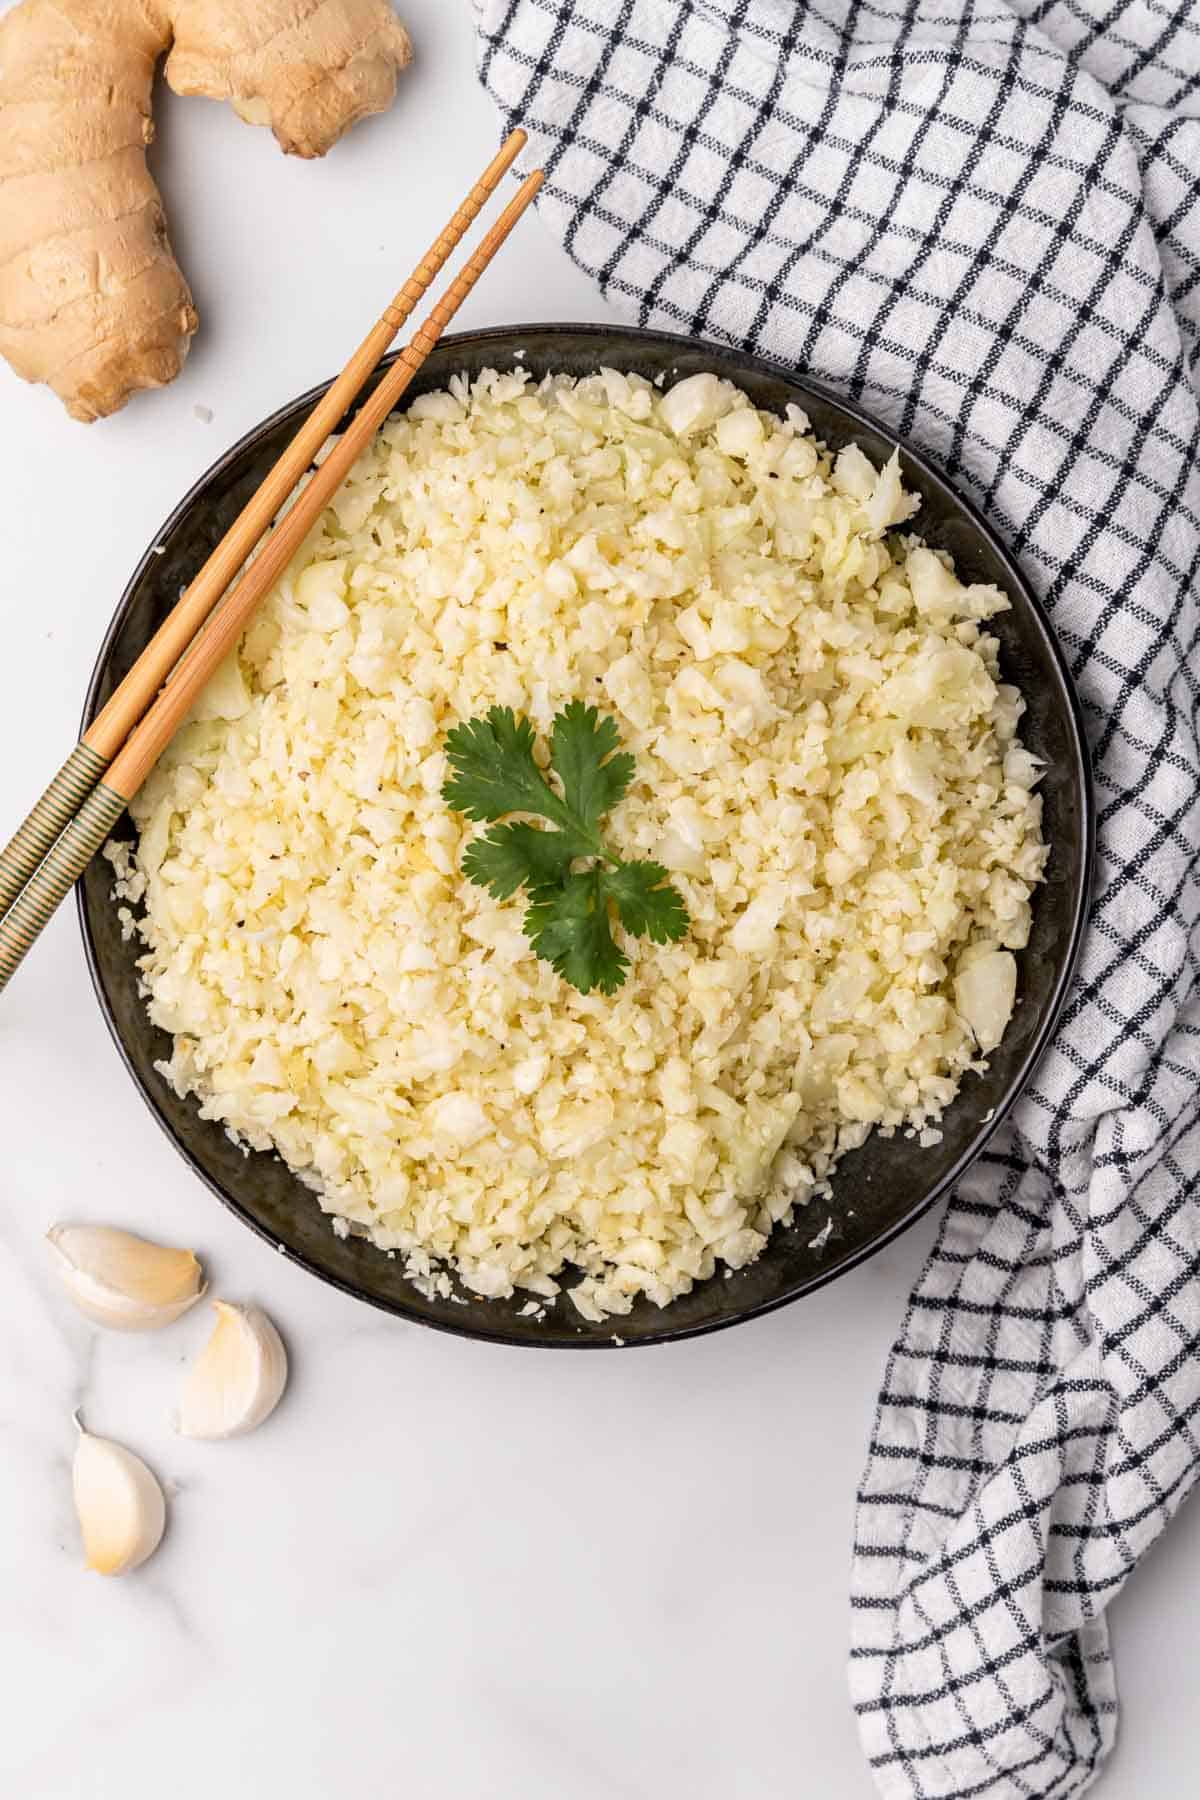 Bowl of cauliflower rice on table with chopsticks